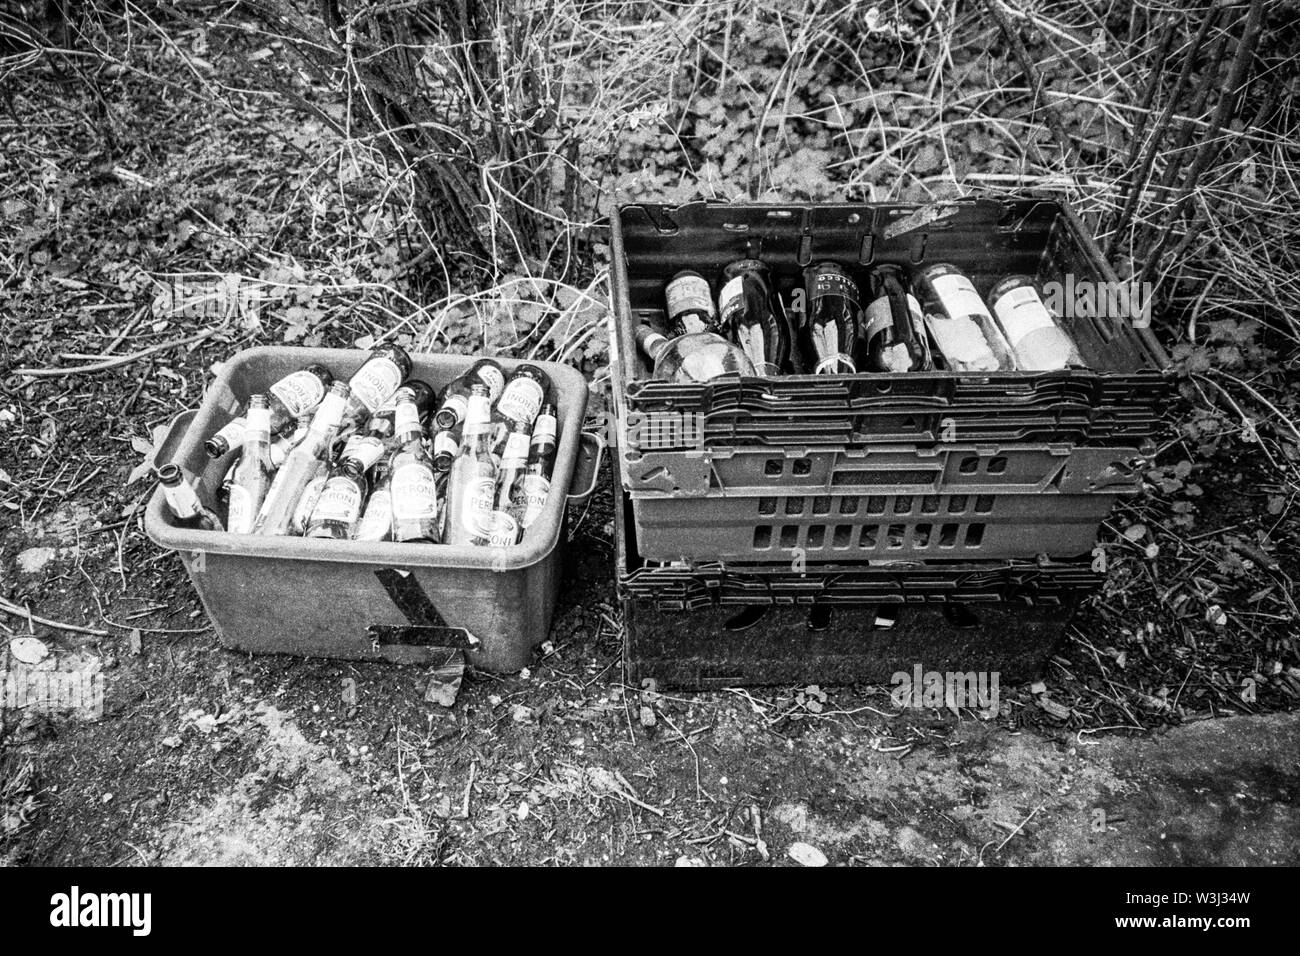 Trays of empty beer bottles waiting to be collected by the recycling truck, Medstead, Hampshire, England, United Kingdom. Stock Photo